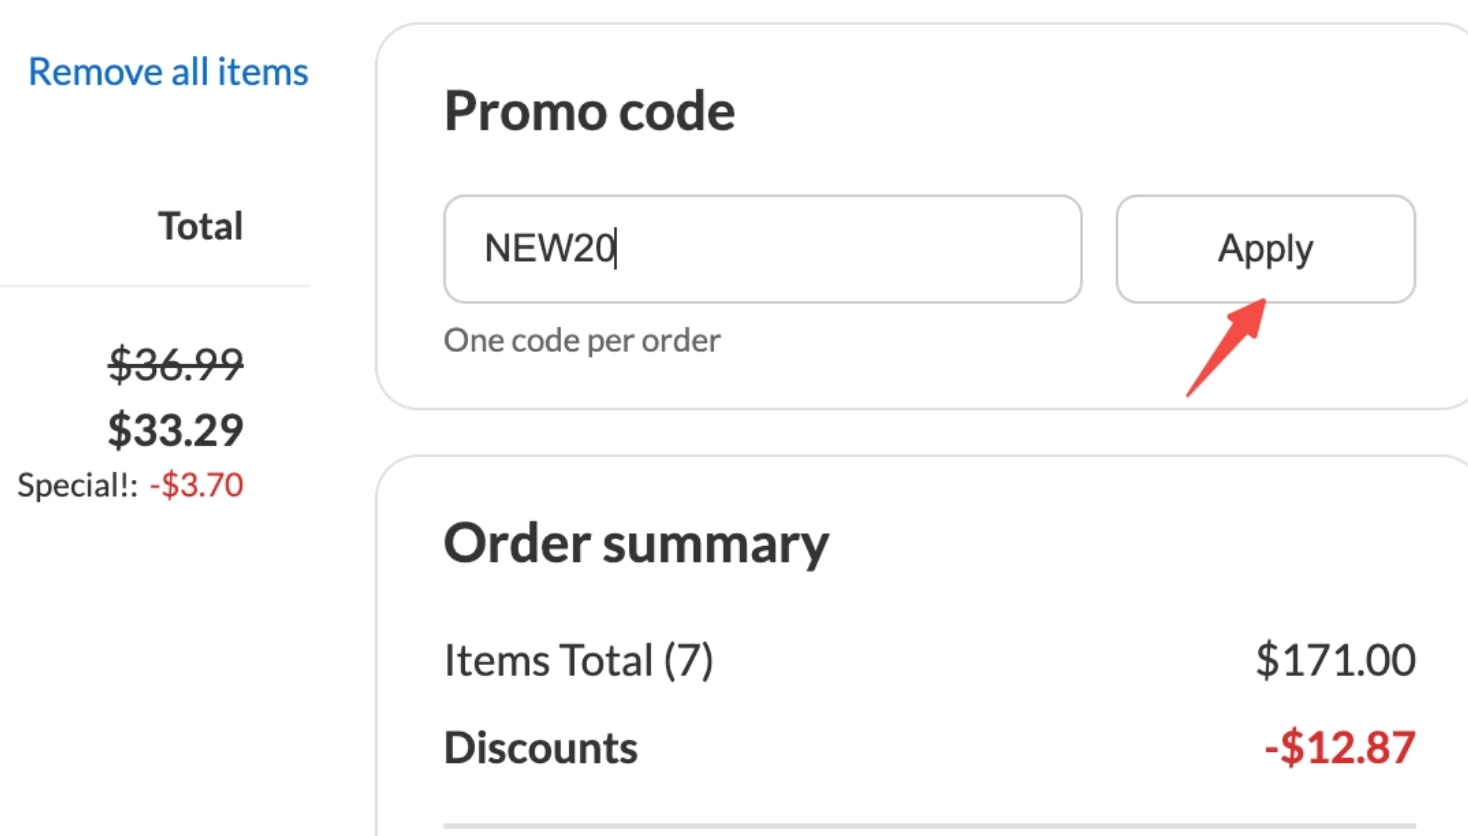 Step 3: When checking out at laserclinics.com.au, paste the discount code into the specified promotional code box.